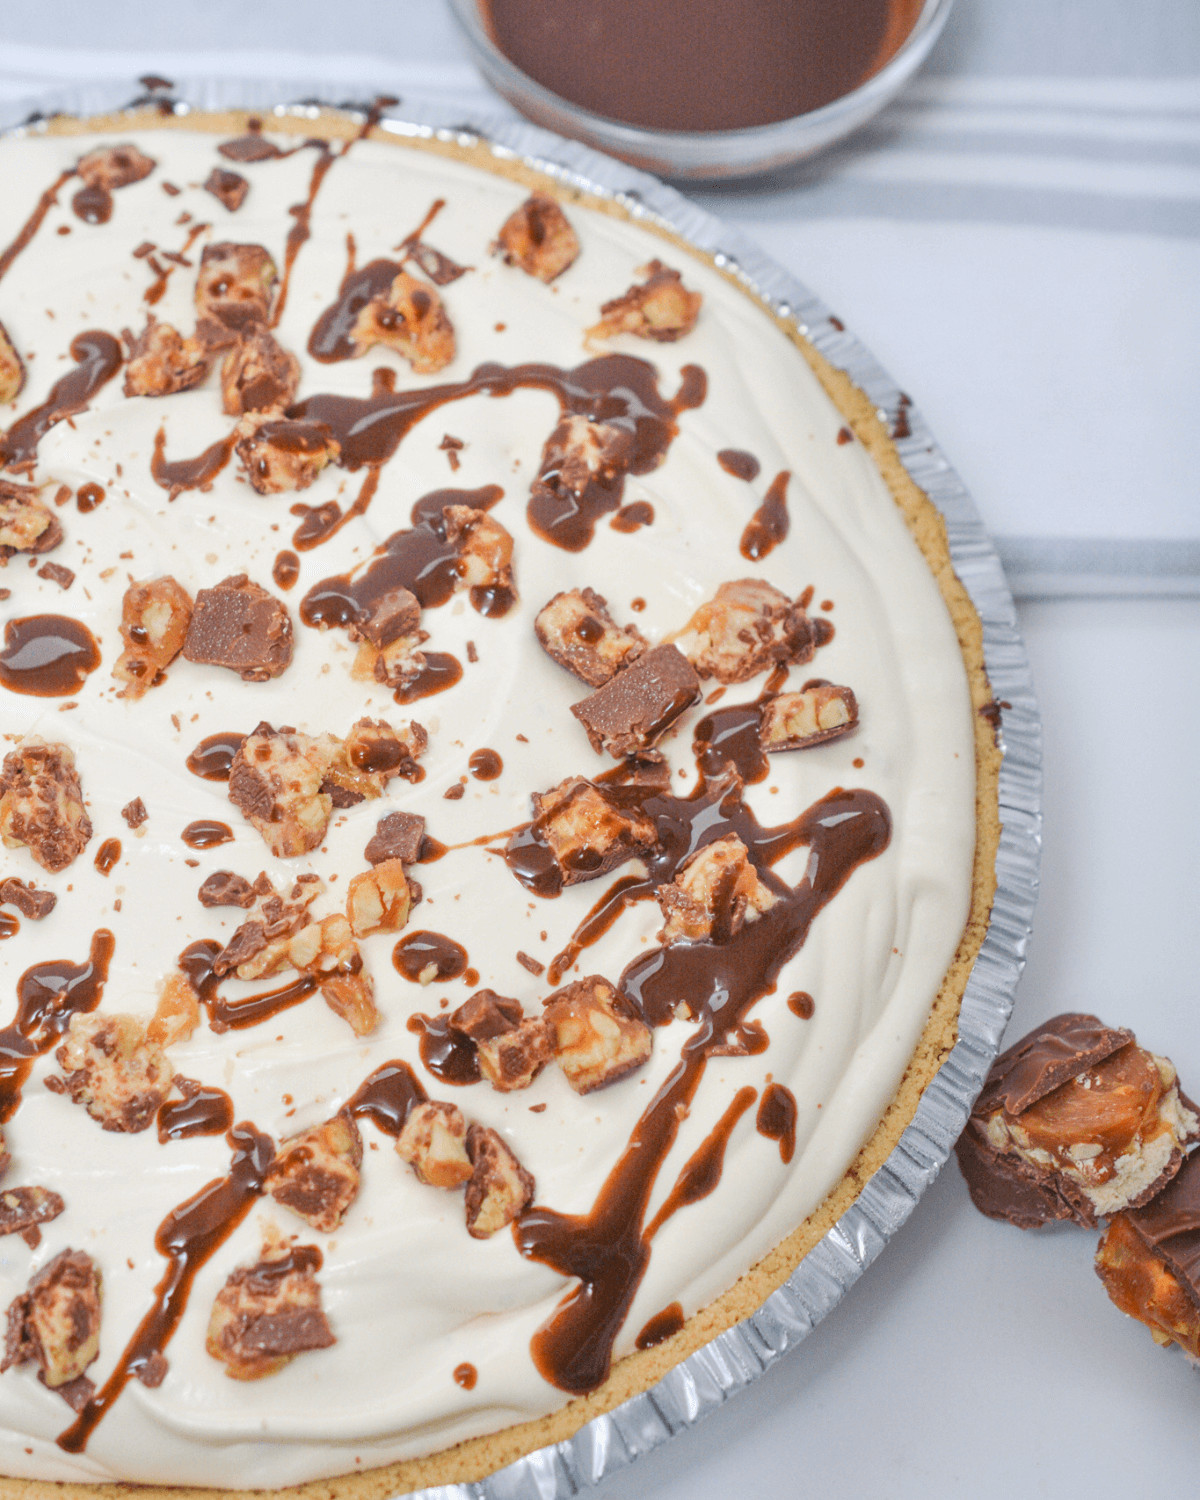 A view of the top of the no bake snickers pie.